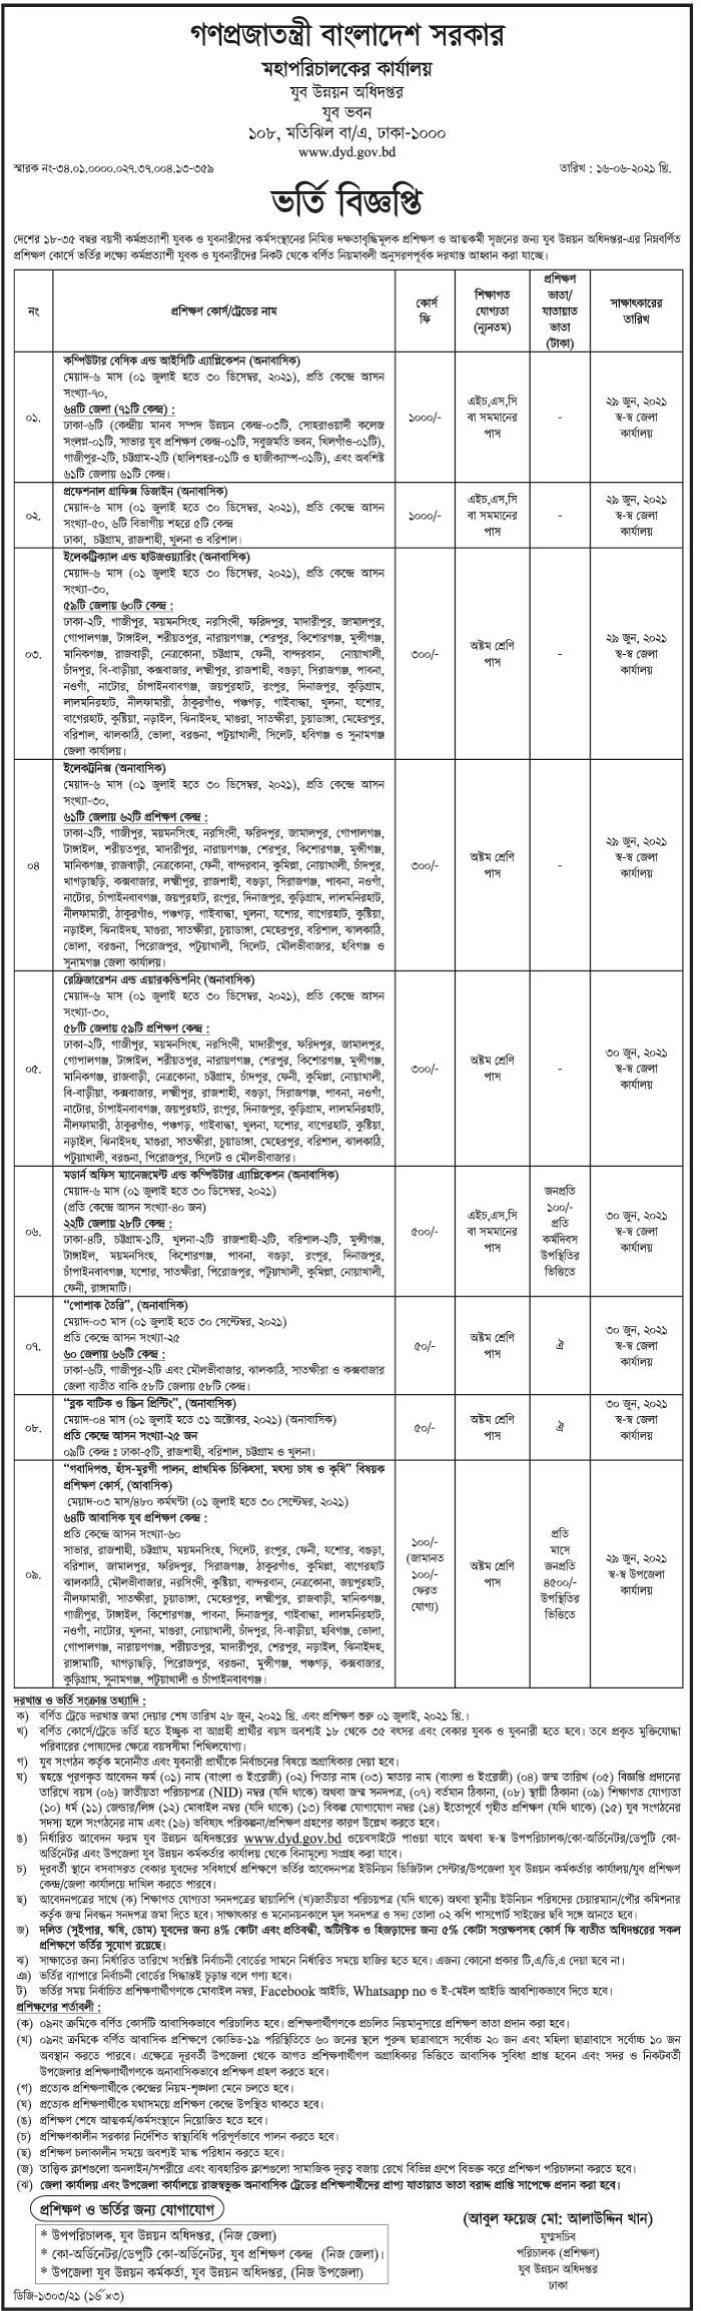 Department of Youth Development Admission Notice